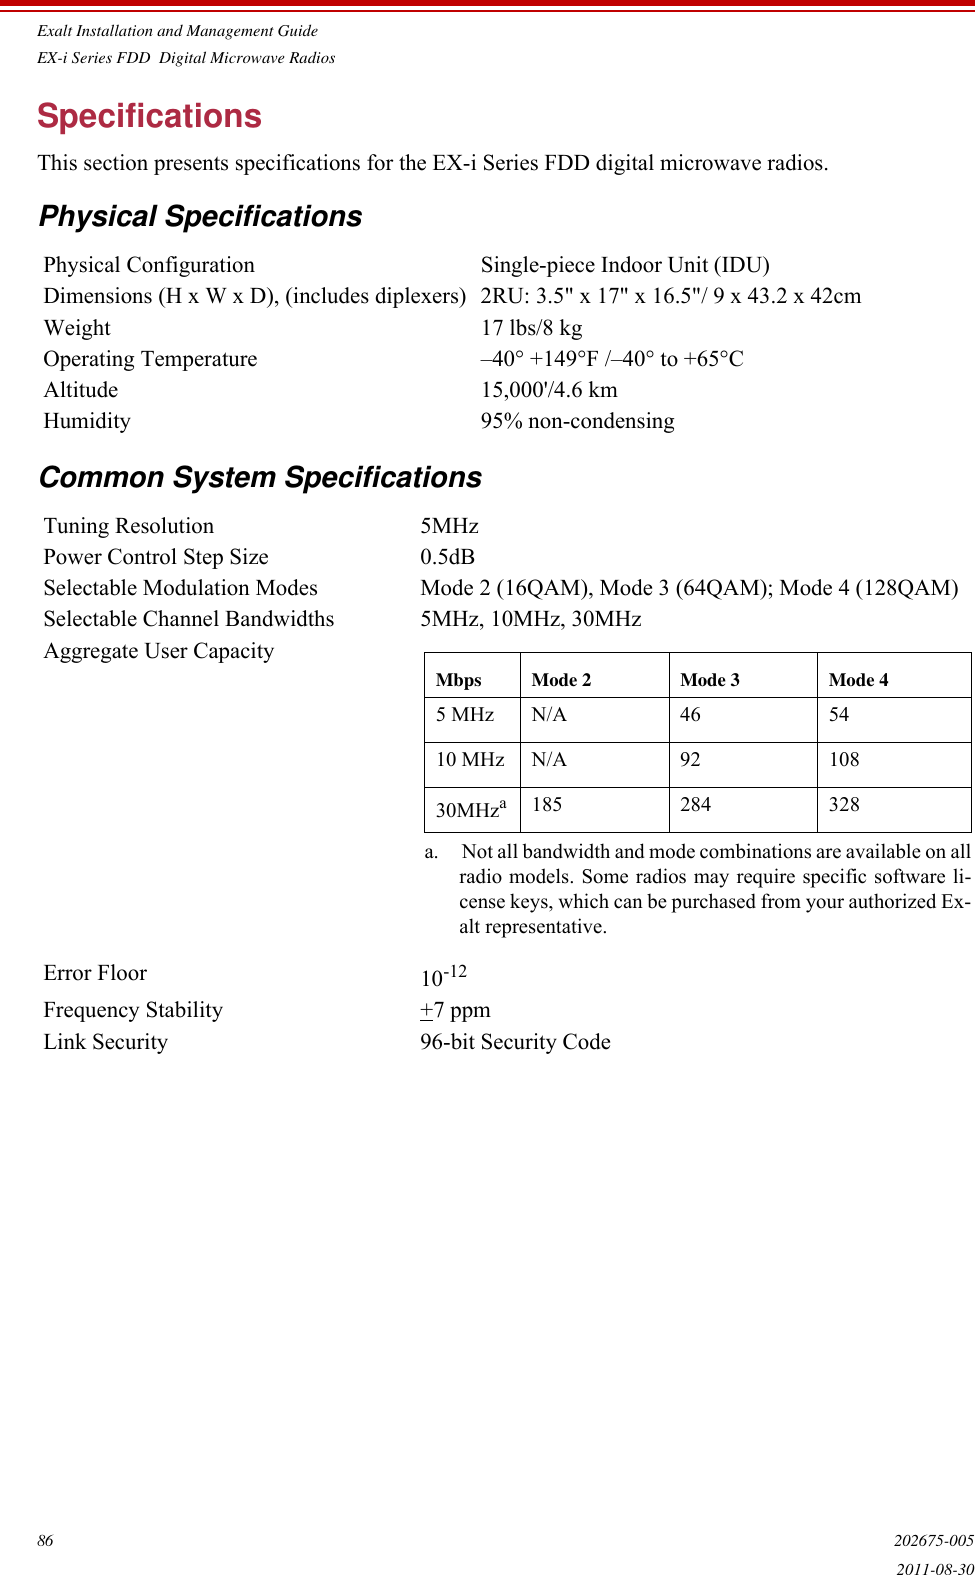 Exalt Installation and Management GuideEX-i Series FDD  Digital Microwave Radios86 202675-0052011-08-30SpecificationsThis section presents specifications for the EX-i Series FDD digital microwave radios.Physical SpecificationsCommon System SpecificationsPhysical Configuration Single-piece Indoor Unit (IDU)Dimensions (H x W x D), (includes diplexers) 2RU: 3.5&quot; x 17&quot; x 16.5&quot;/ 9 x 43.2 x 42cmWeight  17 lbs/8 kgOperating Temperature –40° +149°F /–40° to +65°CAltitude 15,000&apos;/4.6 km Humidity 95% non-condensingTuning Resolution 5MHzPower Control Step Size 0.5dBSelectable Modulation Modes Mode 2 (16QAM), Mode 3 (64QAM); Mode 4 (128QAM)Selectable Channel Bandwidths 5MHz, 10MHz, 30MHzAggregate User CapacityError Floor 10-12Frequency Stability +7 ppmLink Security 96-bit Security CodeMbps Mode 2 Mode 3 Mode 45 MHz N/A 46 5410 MHz N/A 92 10830MHzaa. Not all bandwidth and mode combinations are available on allradio models. Some radios may require specific software li-cense keys, which can be purchased from your authorized Ex-alt representative.185 284 328